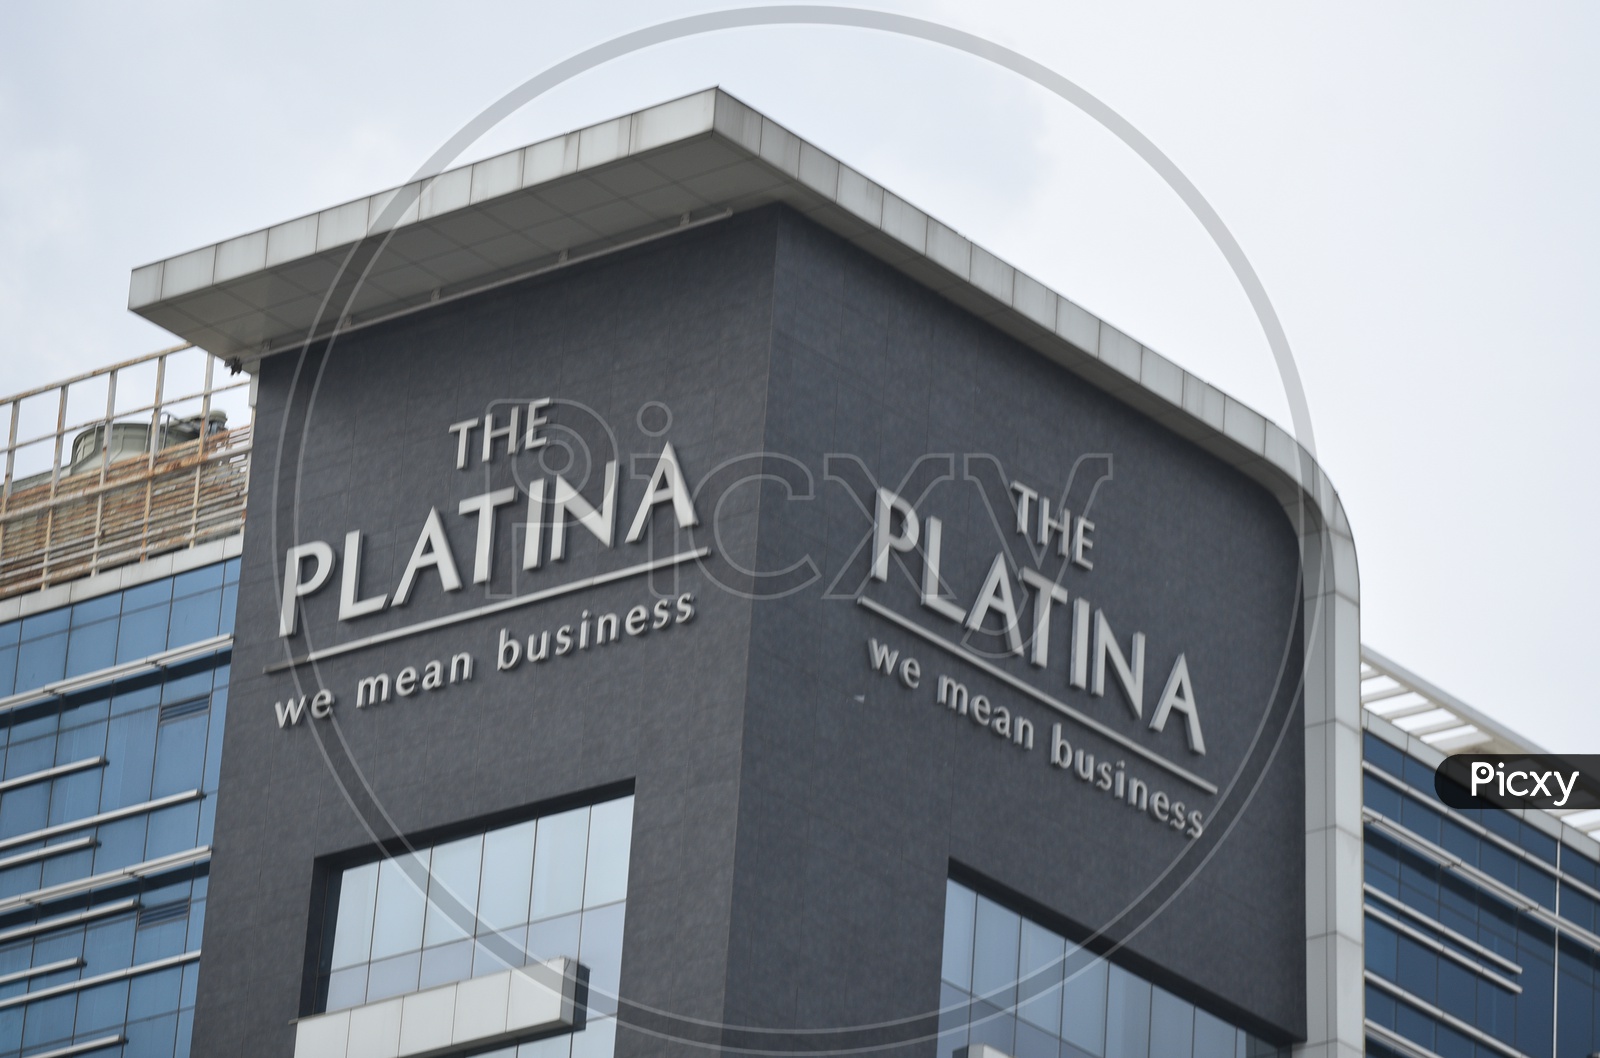 The Platina Group  Corporate Office Name On Building Facade